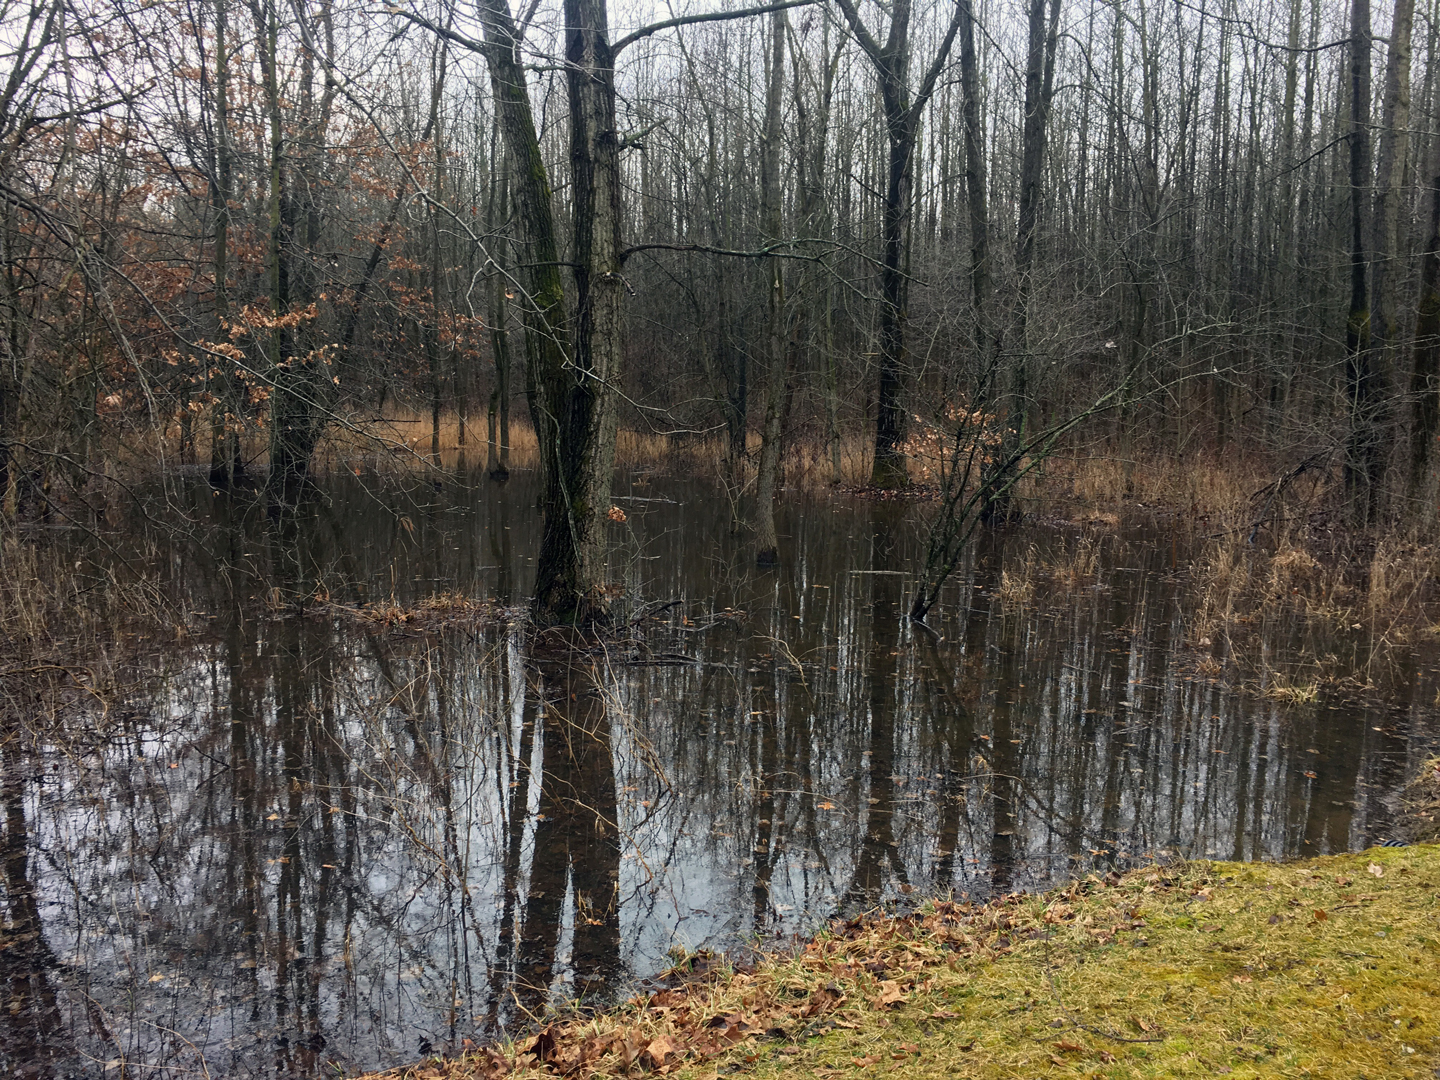 A vernal pool at Walnut Woods with maximum water fill